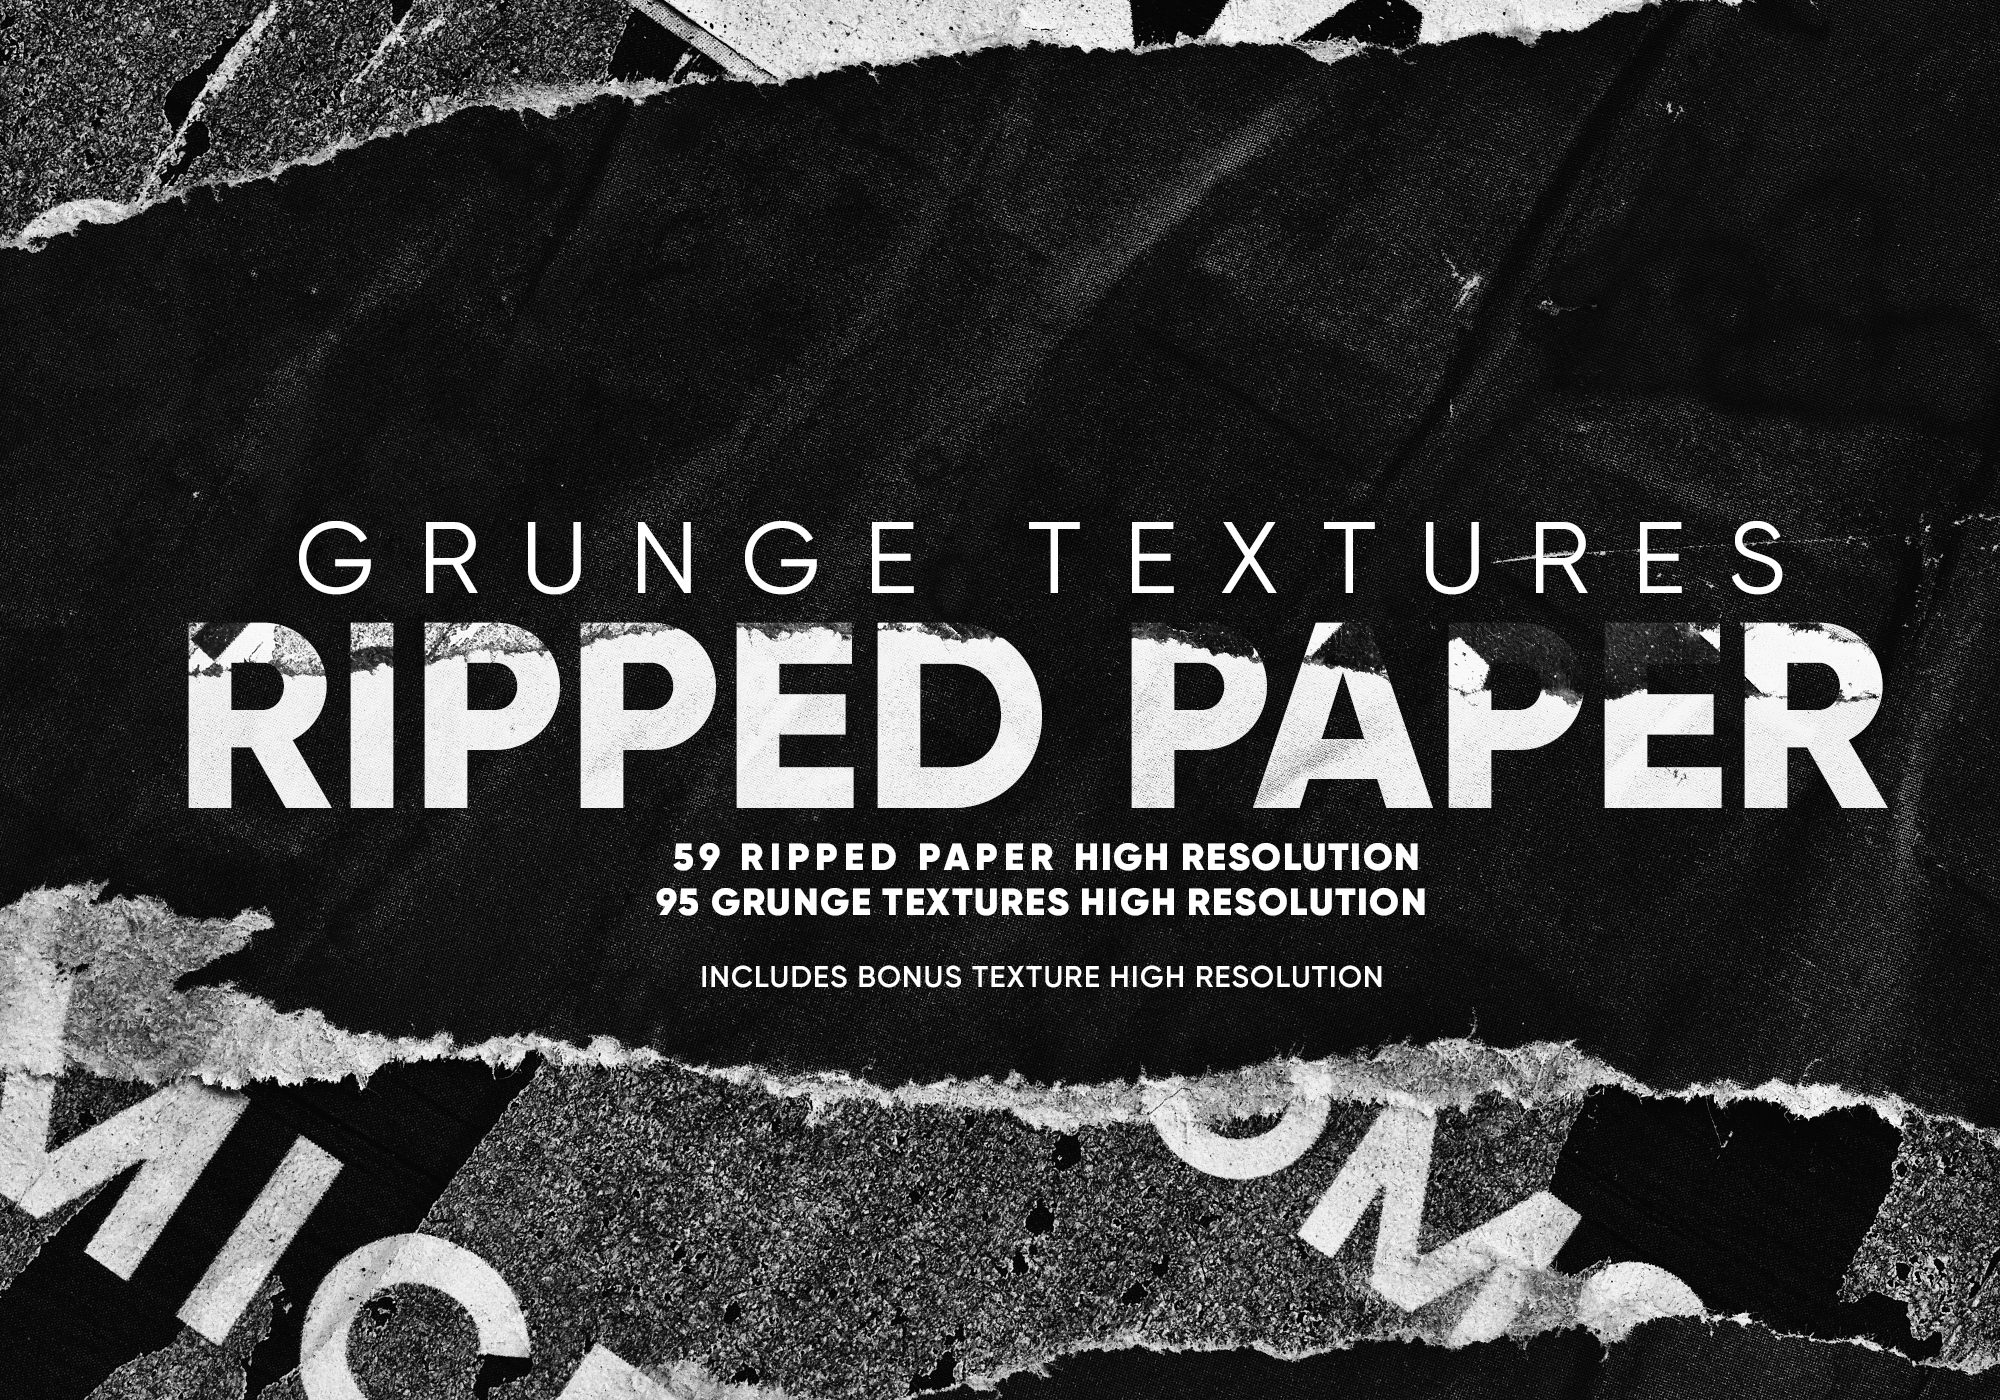 Paper Texture Pack: Paper Texture PNG + Paper Tears